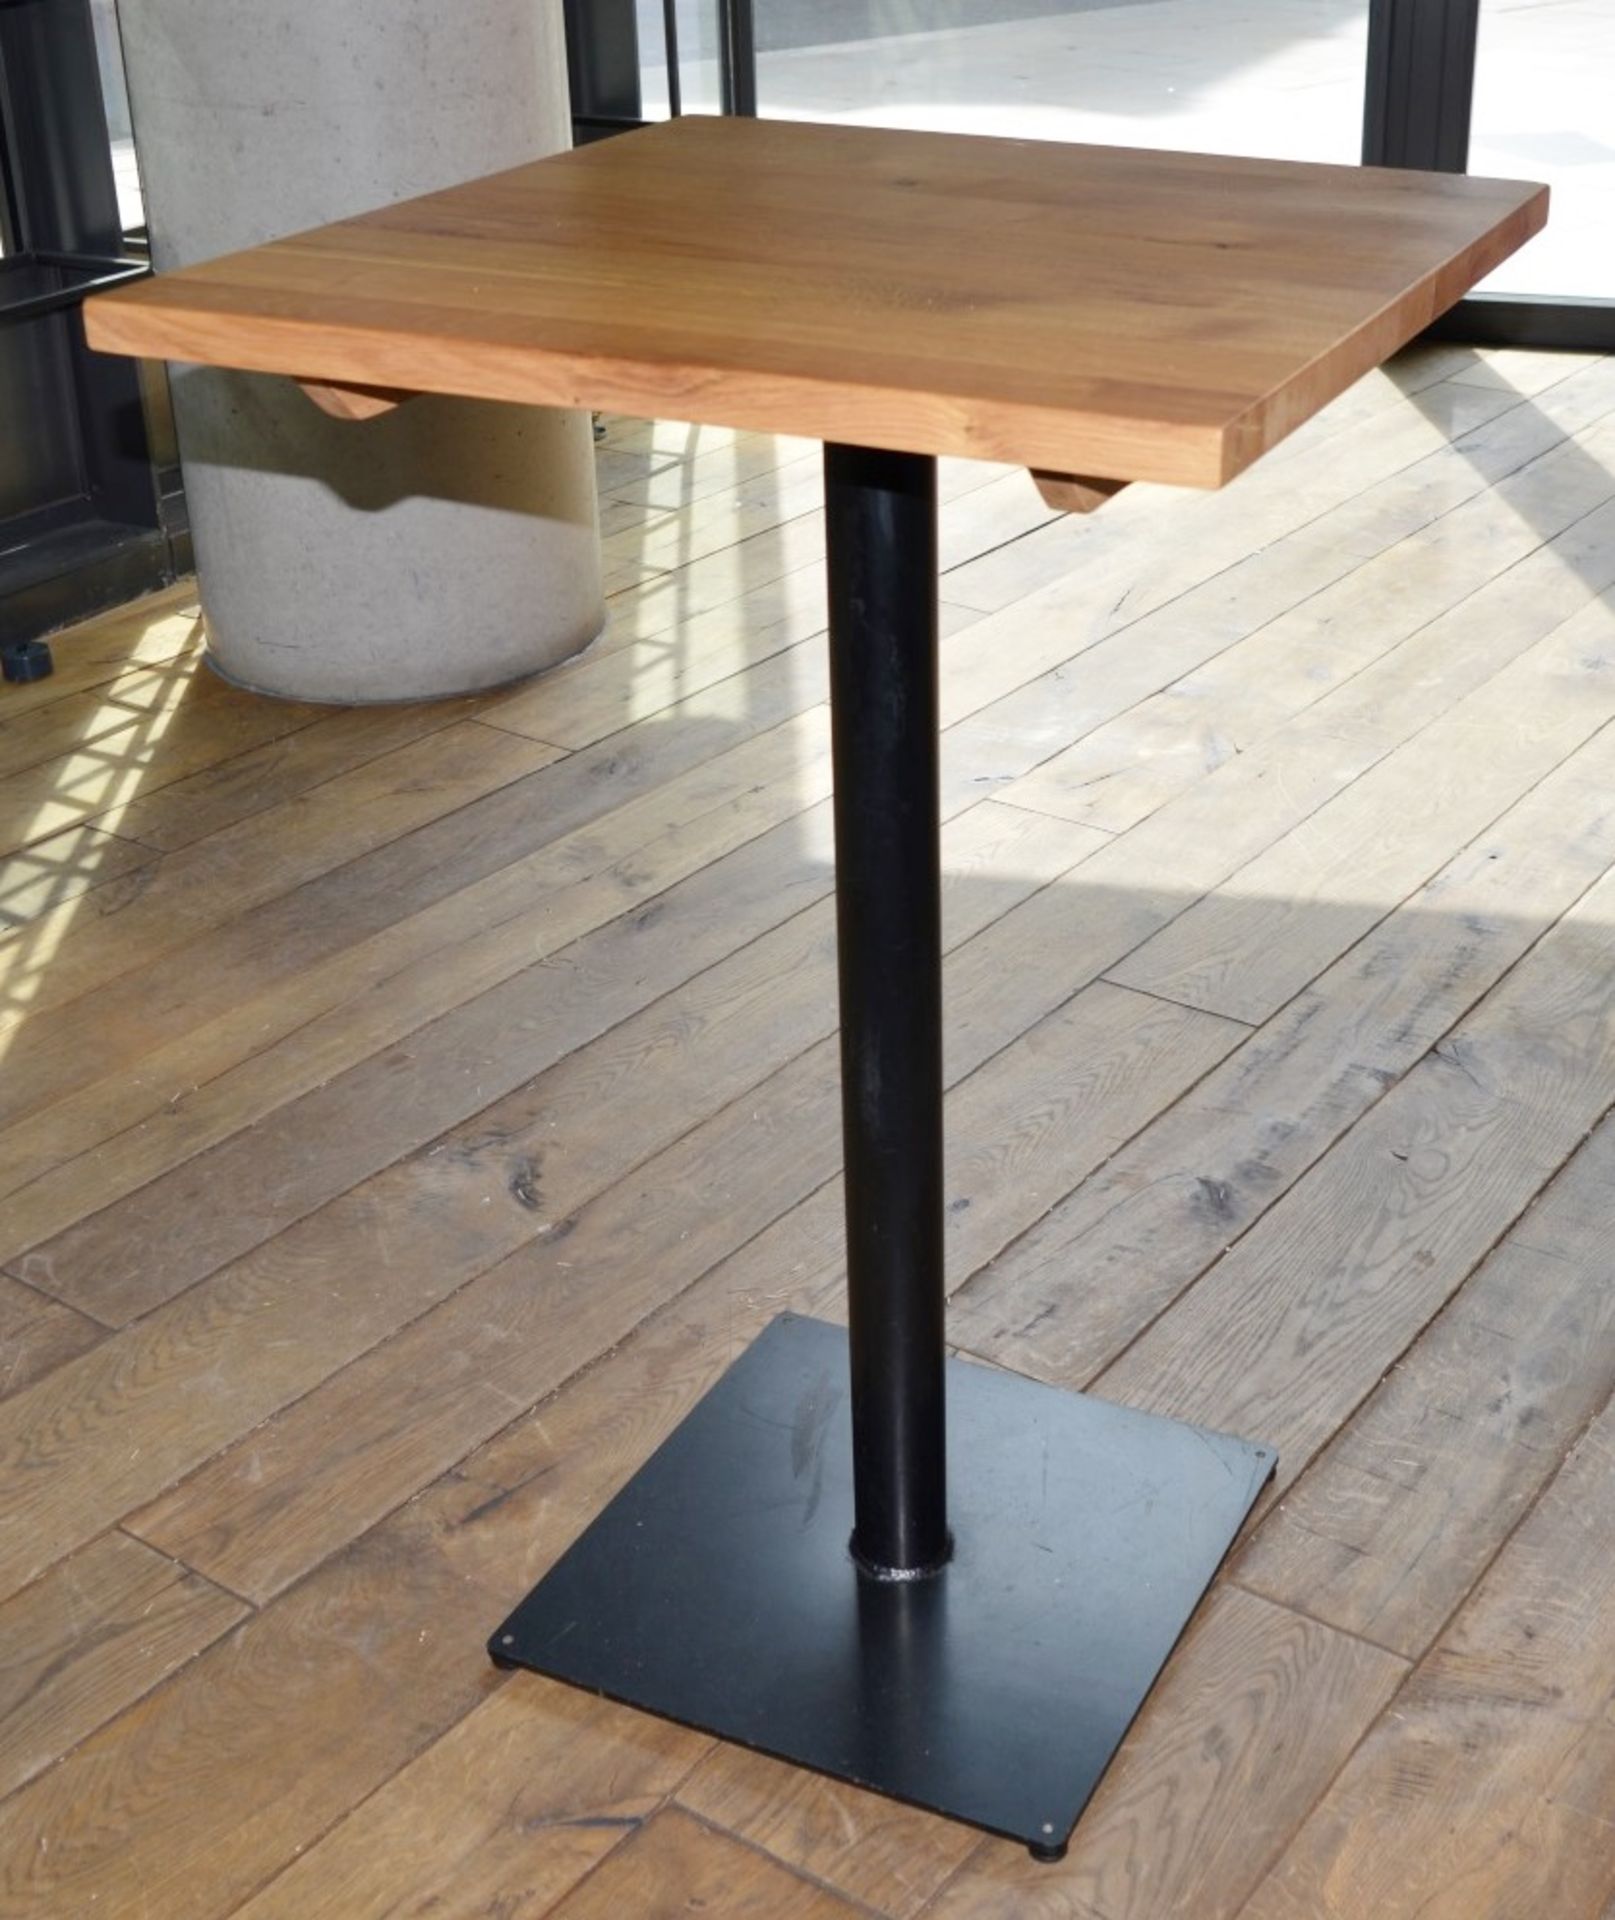 1 x Rustic Knotty Oak Poser Table - Suitable For Pubs & Restaurants - Substantial Base With Solid - Image 4 of 4